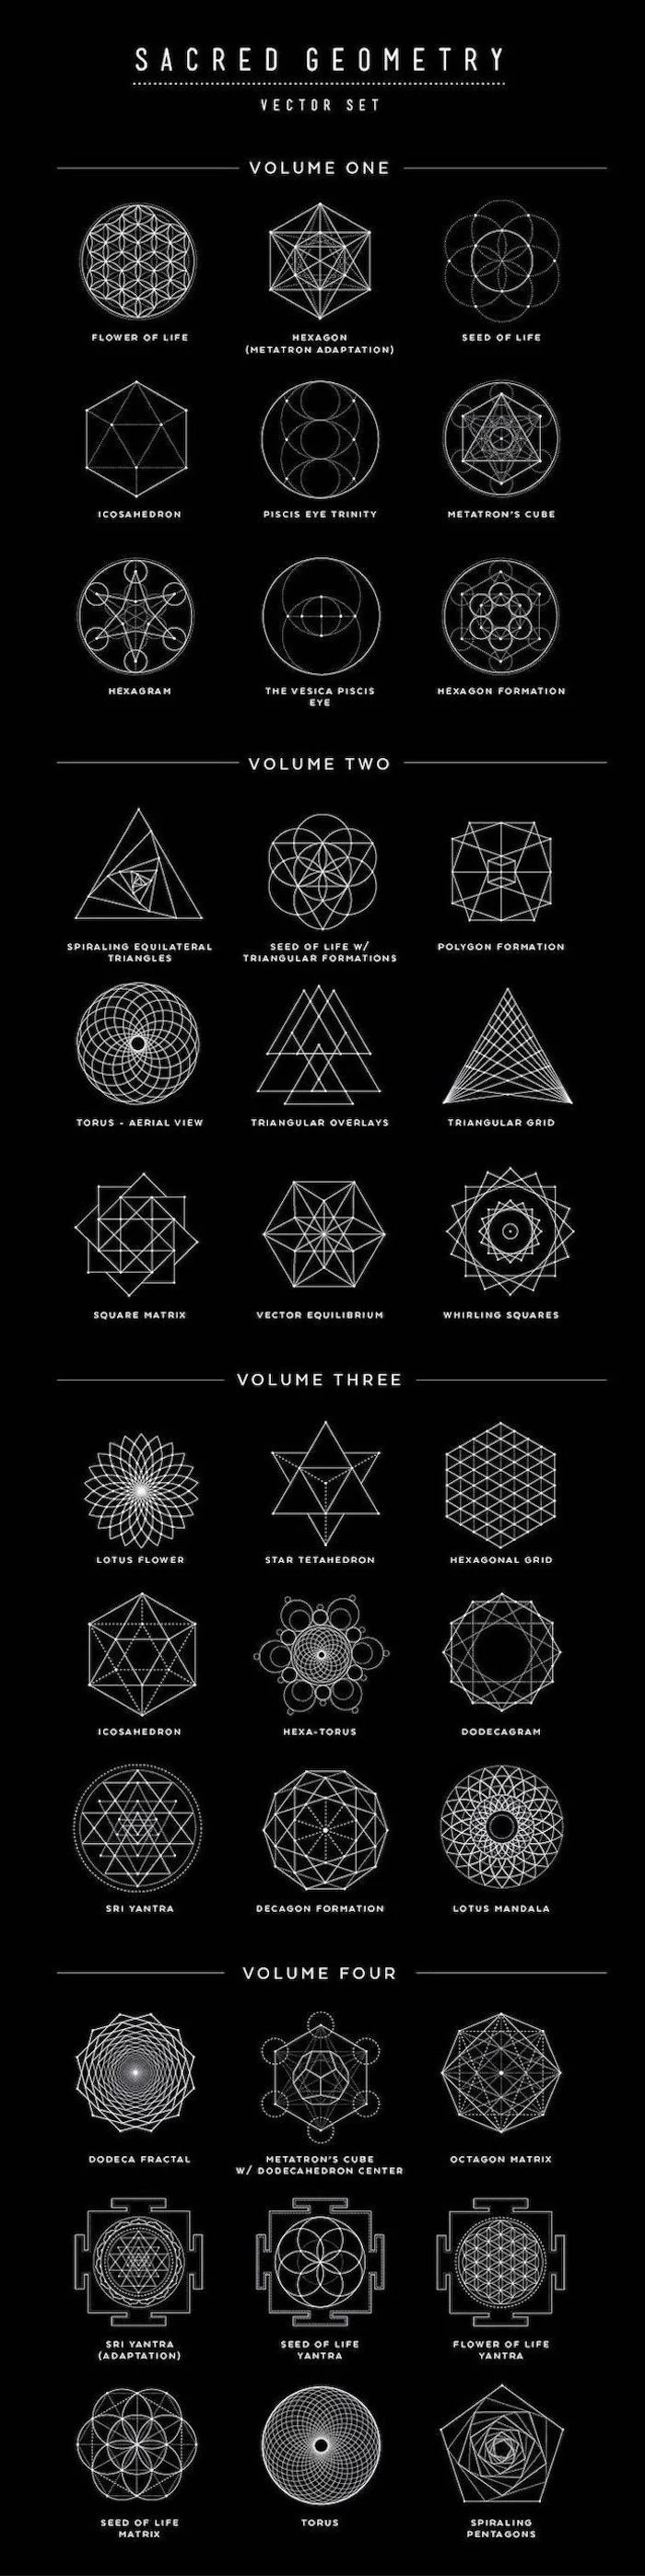 geometry symbols which are sacred spiritual tattoos chart with the symbols and meaning black background